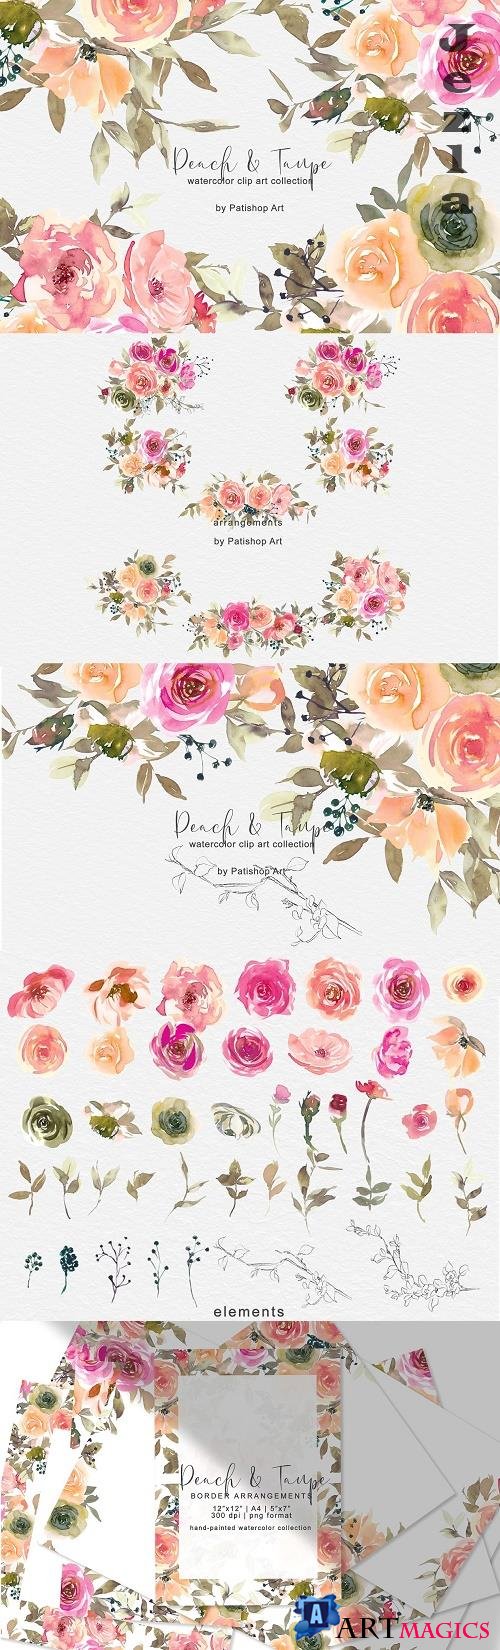 Peach & Taupe Watercolor Collection - 4814756